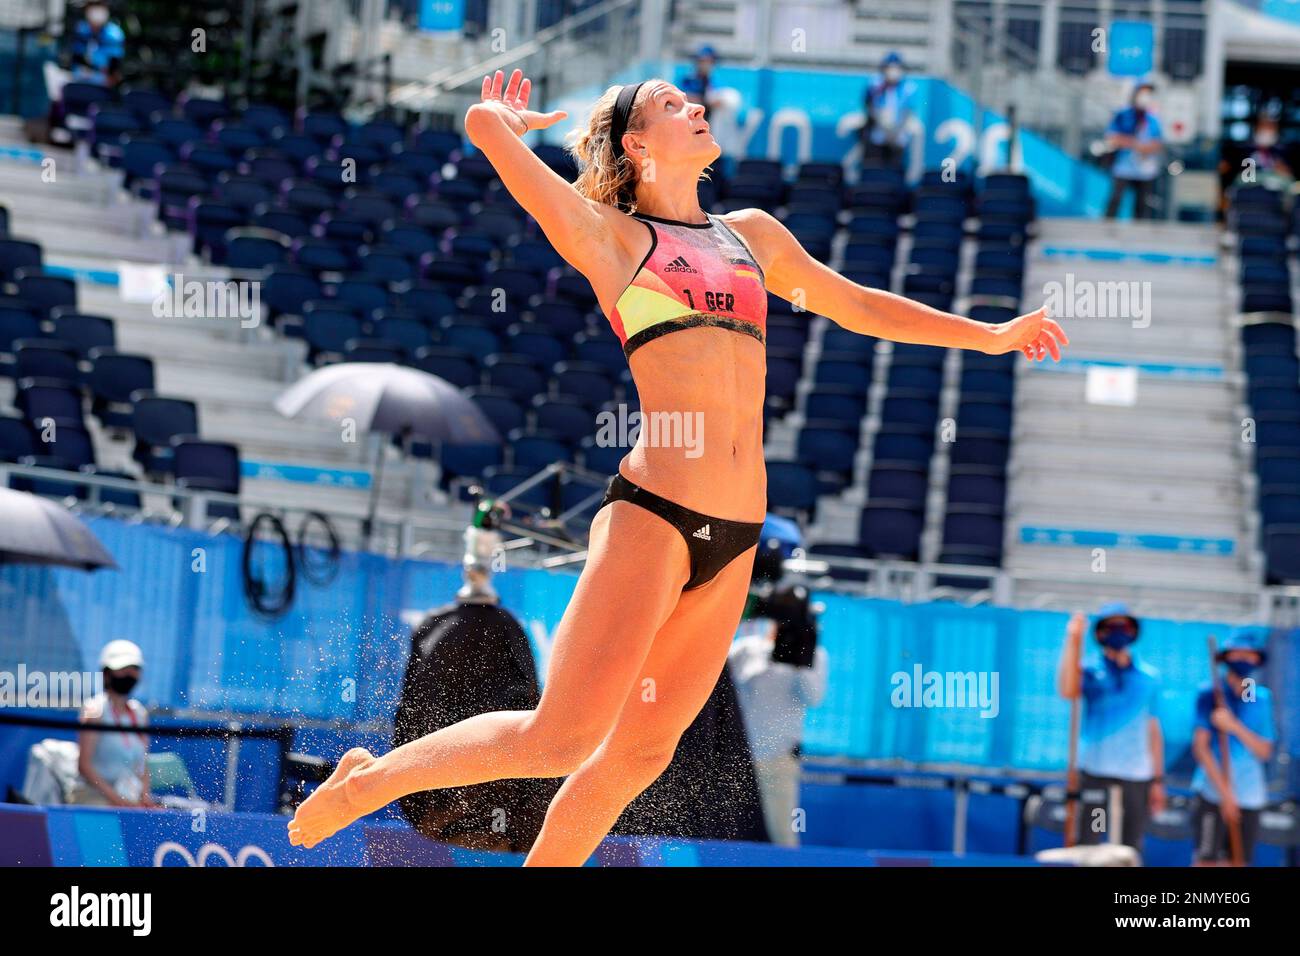 TOKYO, JAPAN - AUGUST 03: Laura Ludwig of Team Germany serves during the  Women's Beach Volleyball Quarterfinal match between Germany and USA on Day  11 of the Tokyo 2020 Olympic Games at